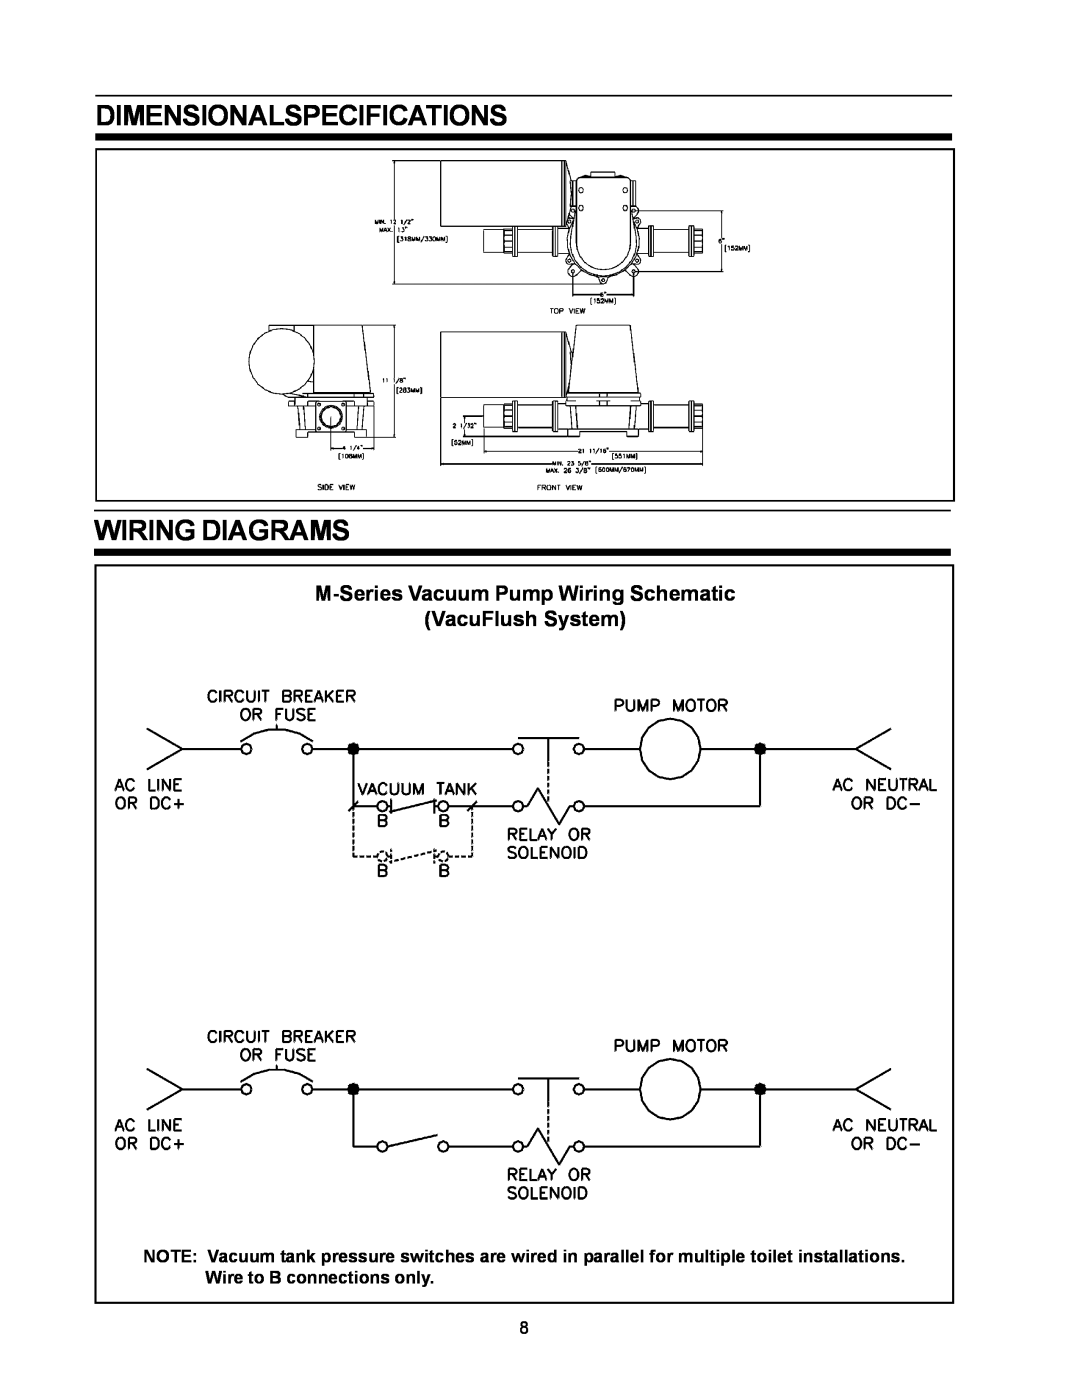 SeaLand owner manual Dimensionalspecifications Wiring Diagrams, M-SeriesVacuum Pump Wiring Schematic, VacuFlush System 